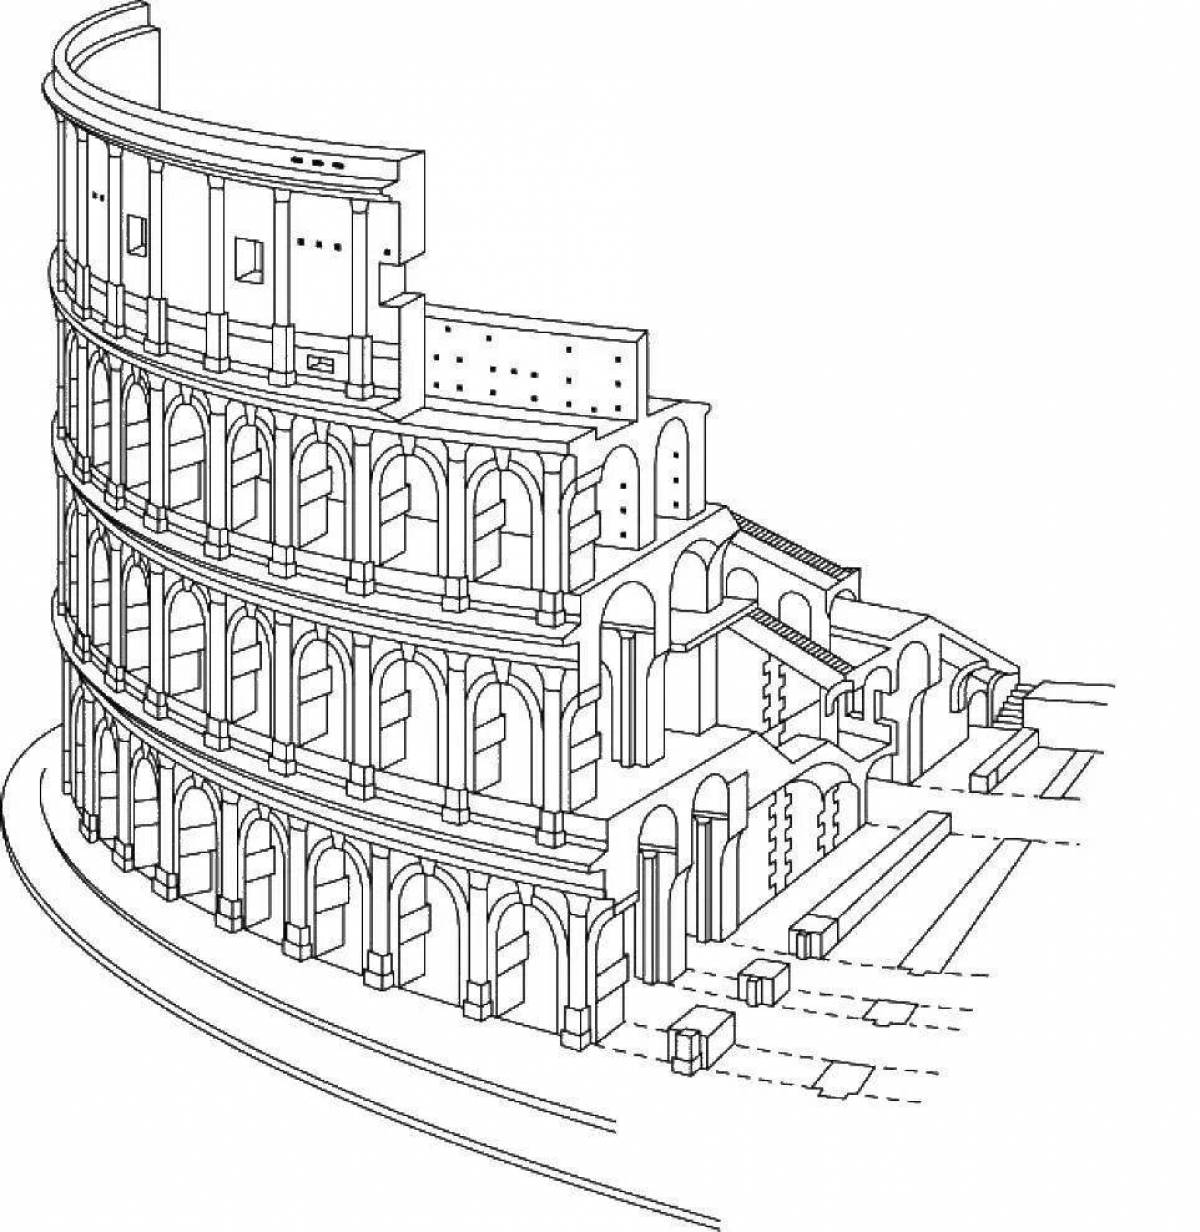 Luxury colosseum coloring book